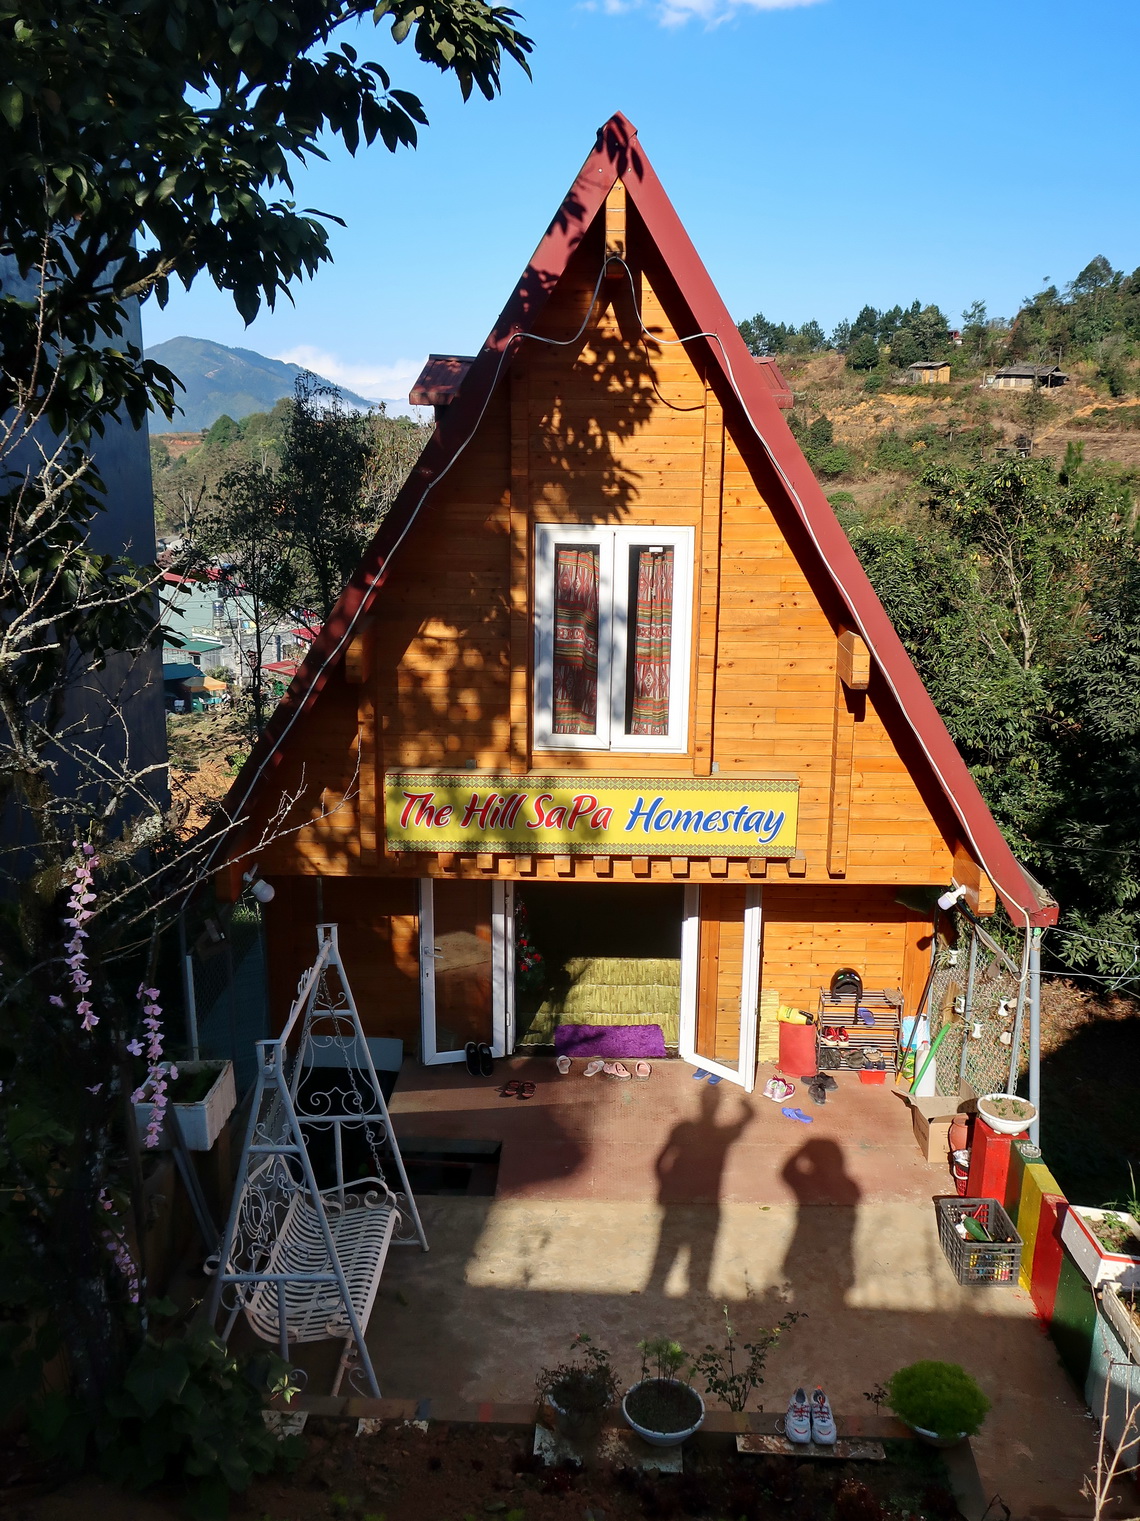 Our cozy home in Sapa - The Hill Sapa Homestay